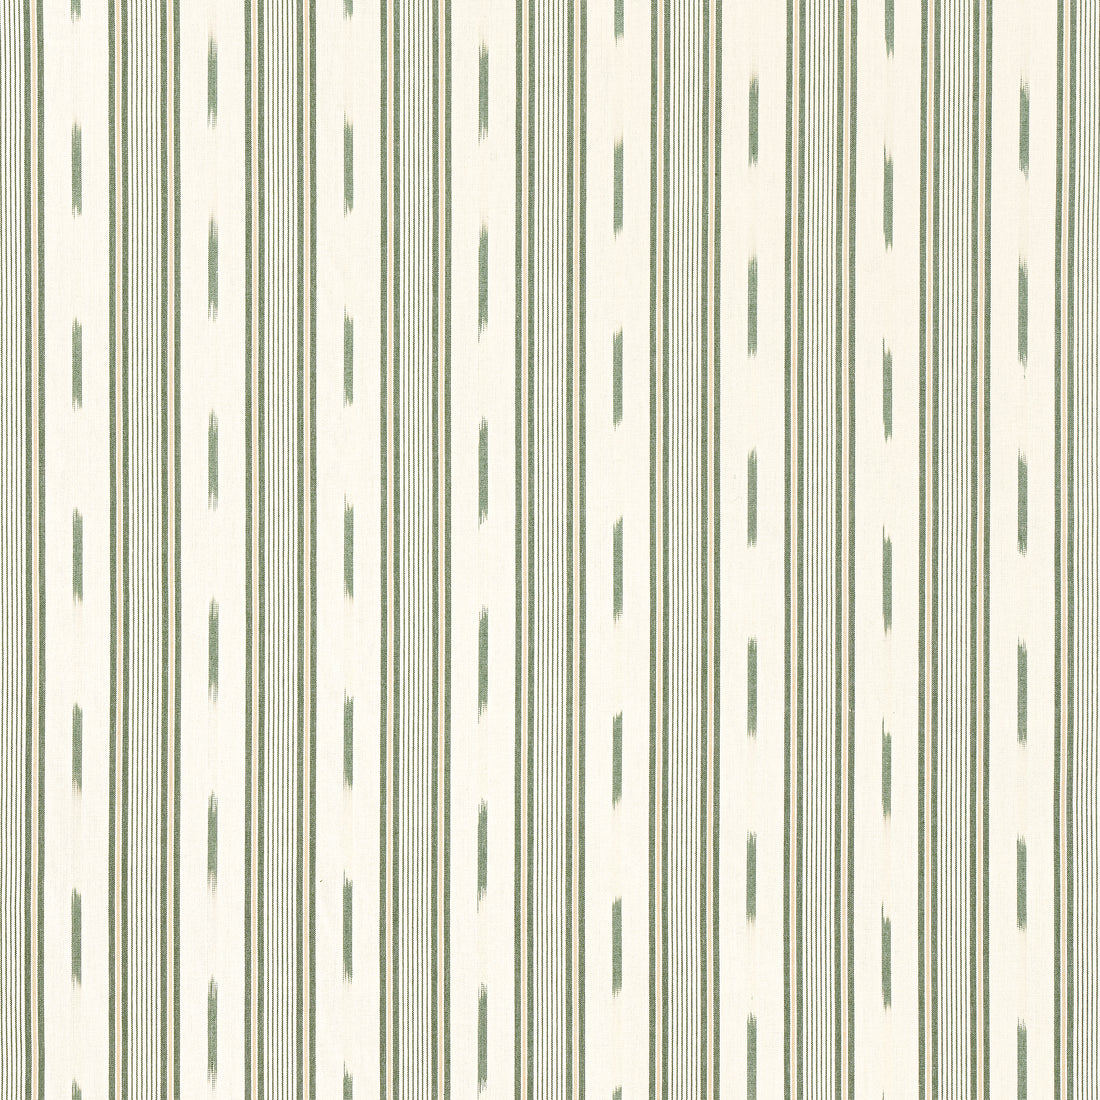 Odeshia Stripe fabric in spruce color - pattern number W781307 - by Thibaut in the Montecito collection